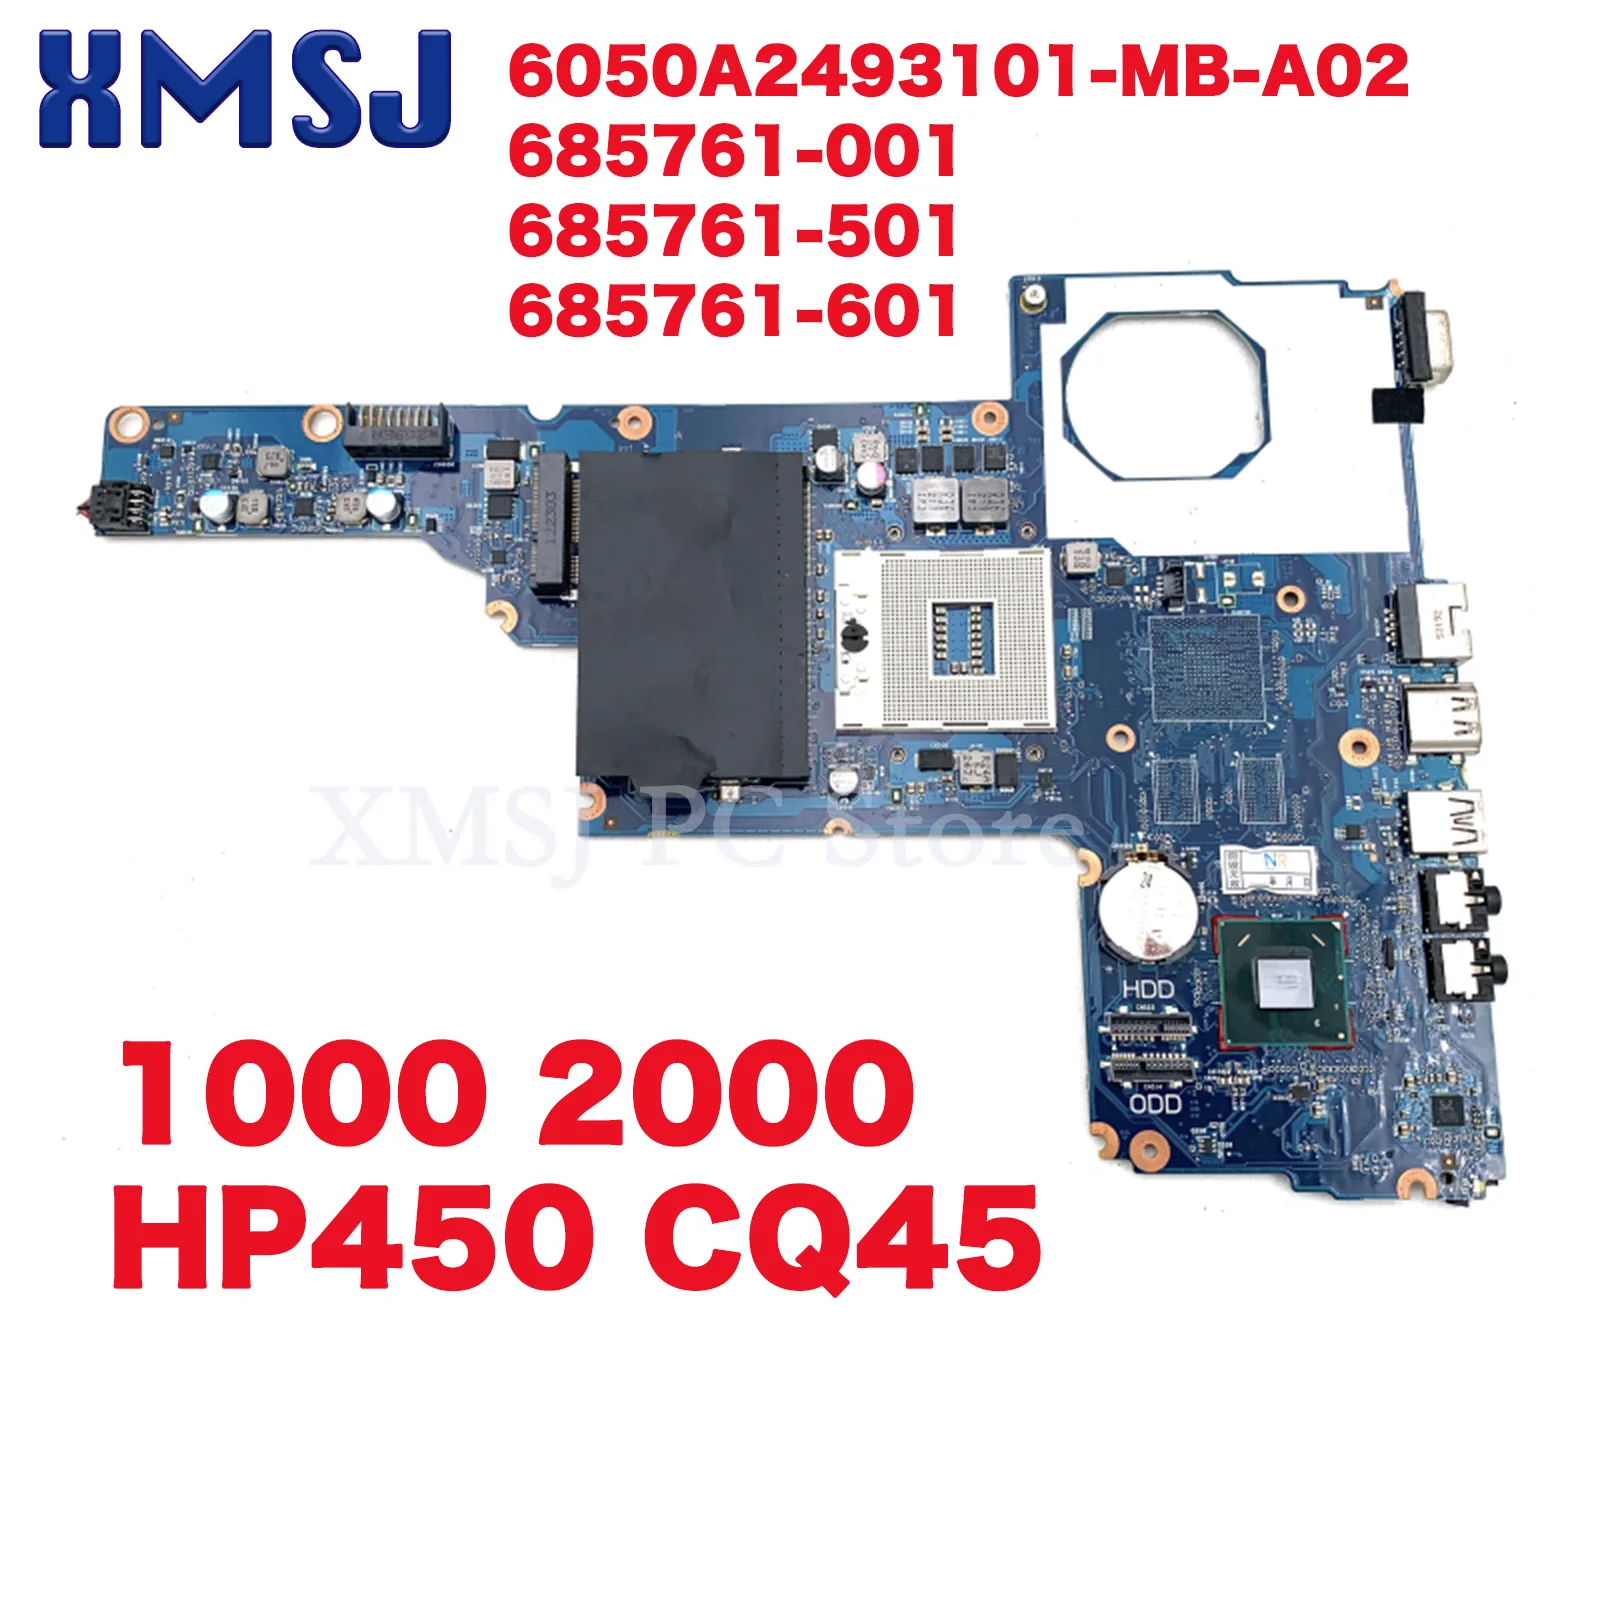 

XMSJ 6050A2493101-MB-A02 685761-001 685761-501 685761-601 For HP 1000 2000 HP450 CQ45 Laptop Motherboard HM75 DDR3